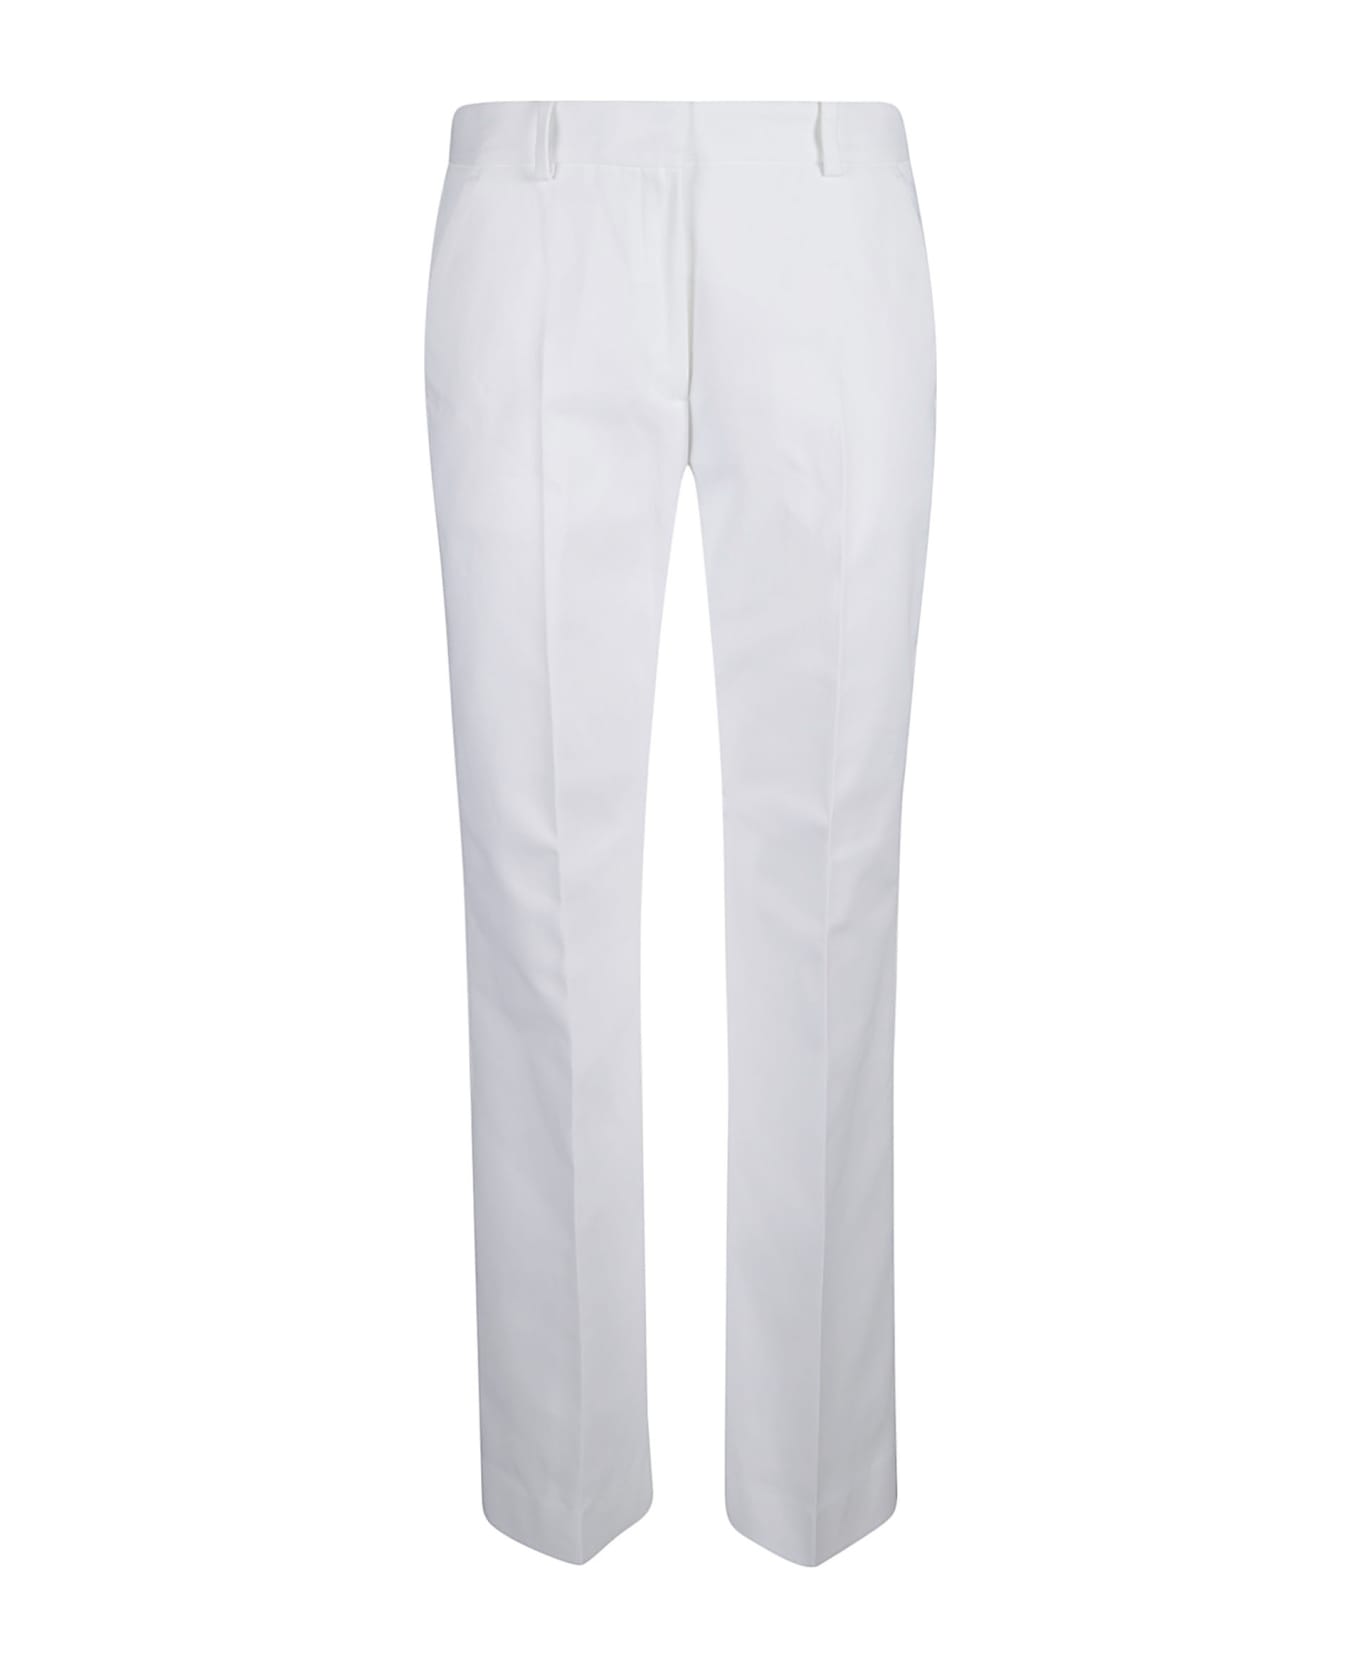 Calvin Klein Cotton Twill Relax Bootcut Trousers - Bright White ボトムス